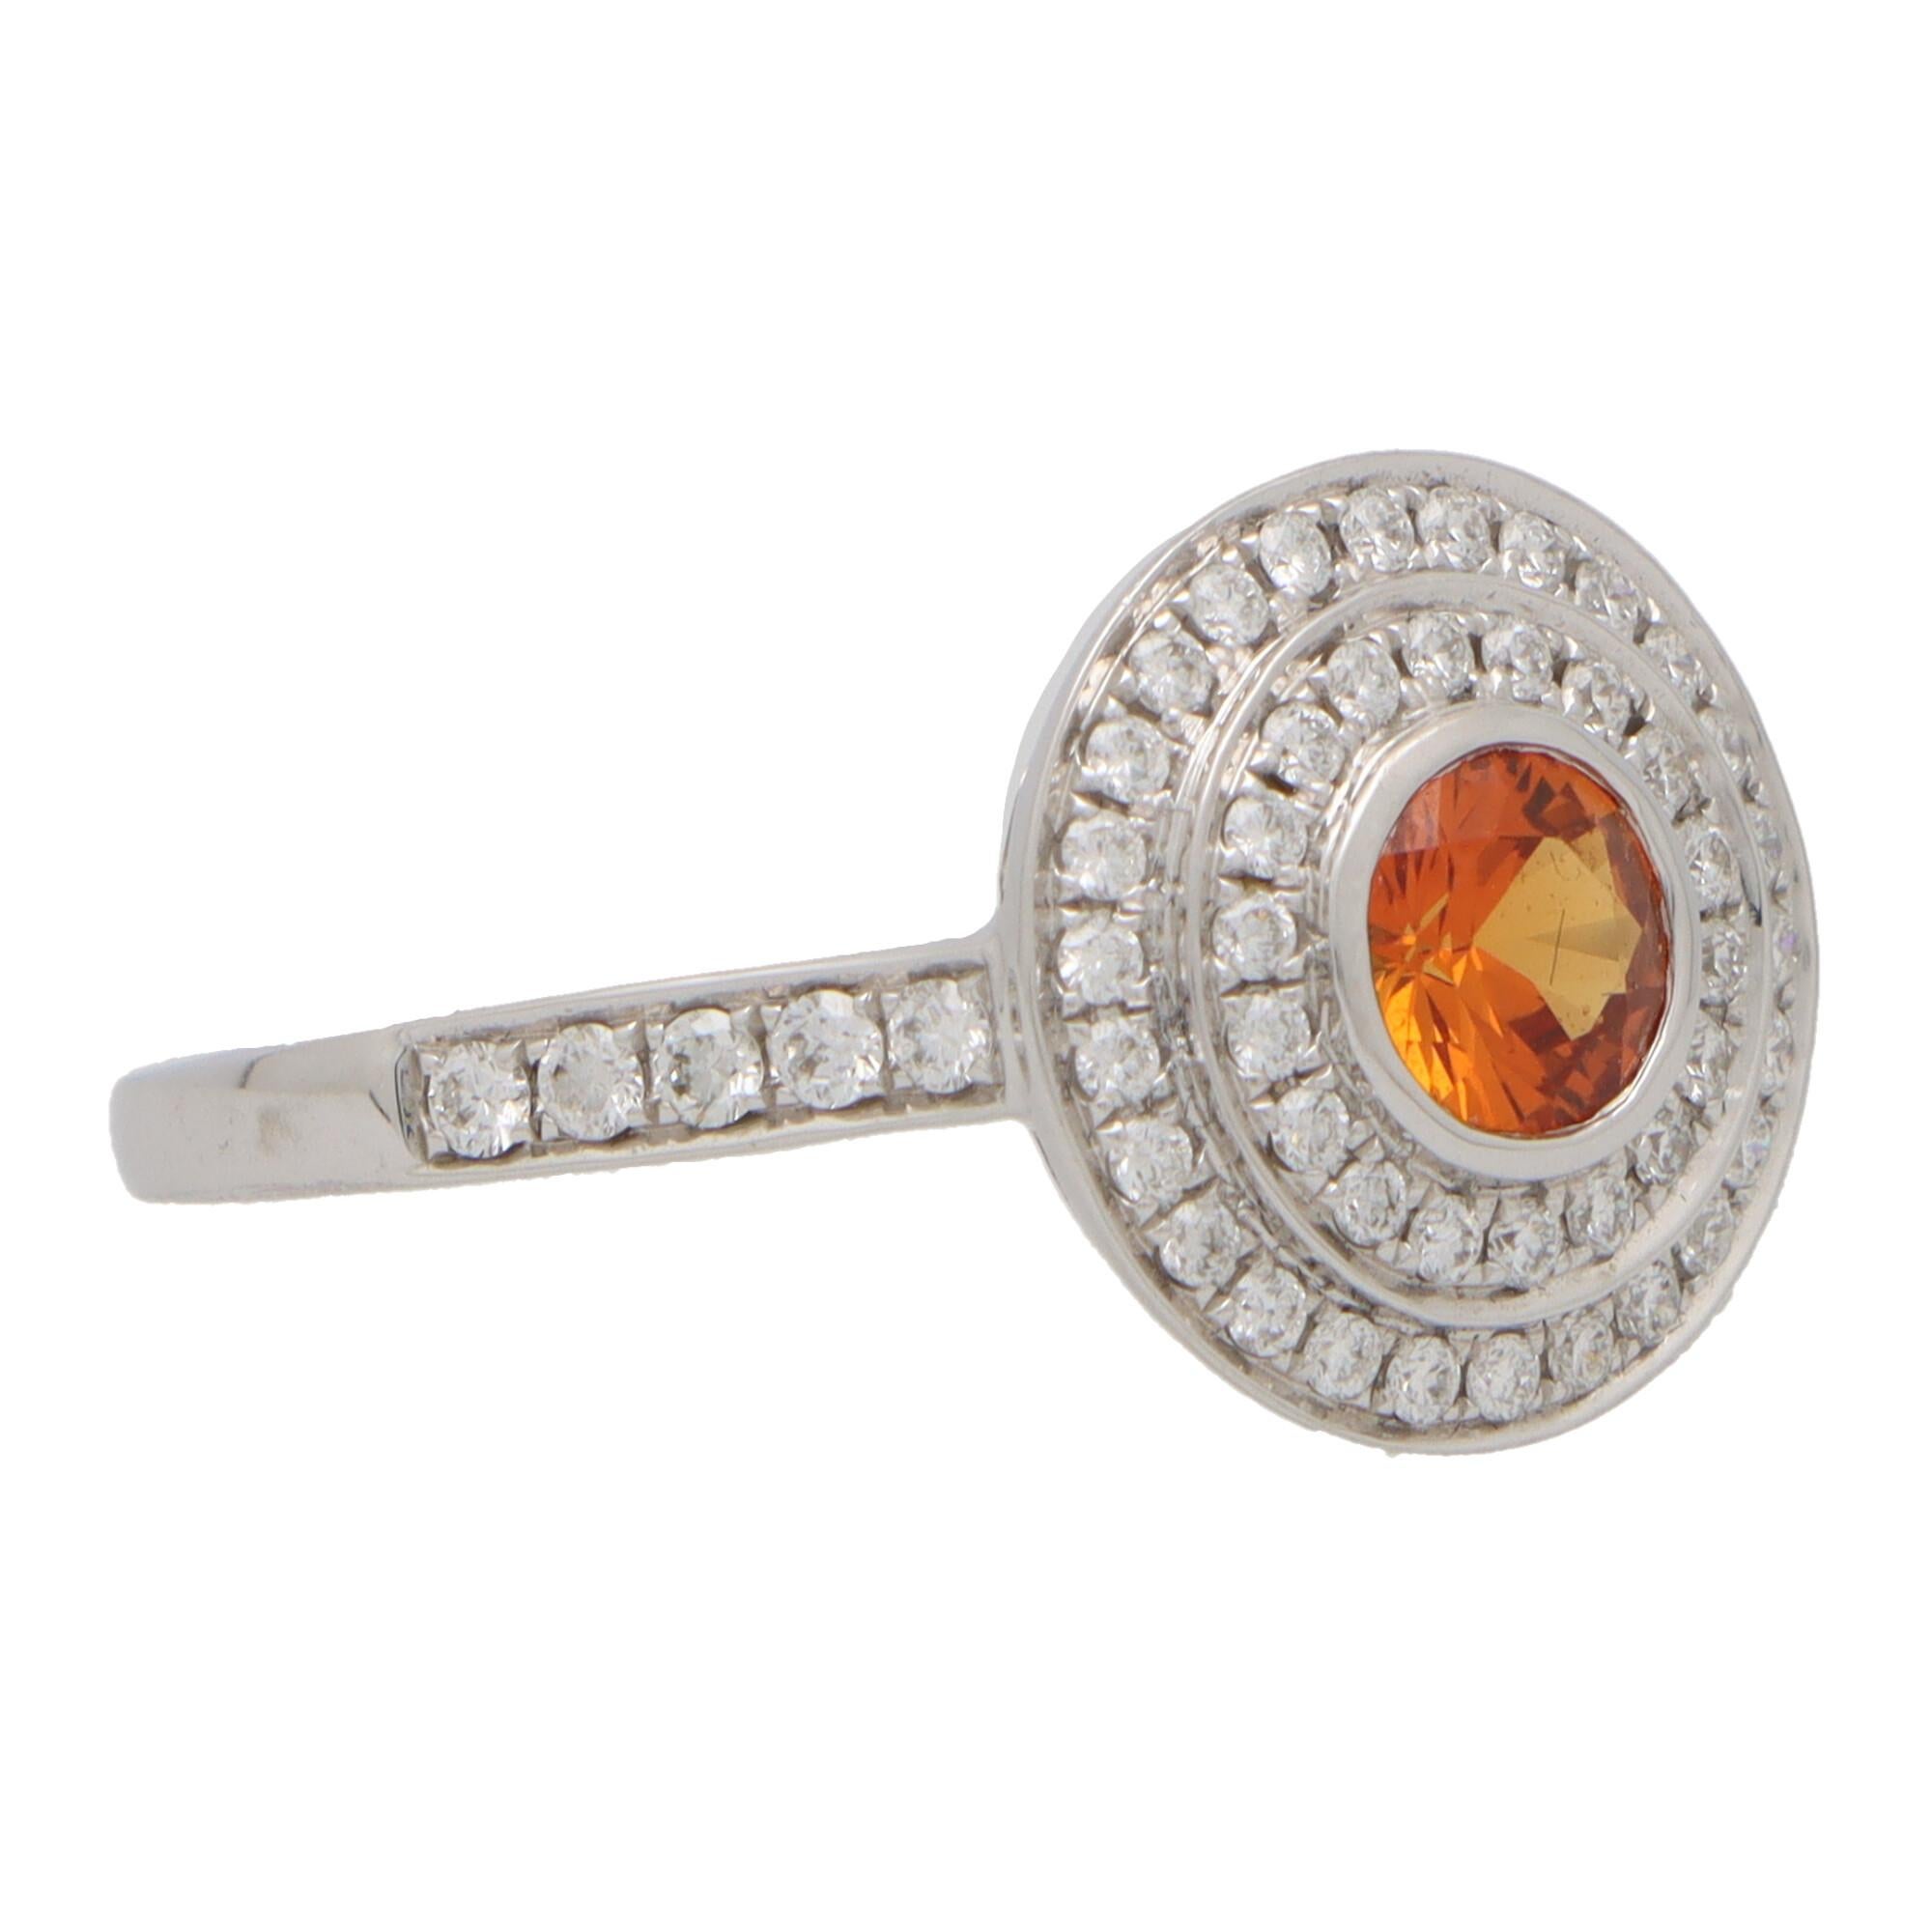 A beautiful orange sapphire and diamond double target ring set in 18k white gold.

The ring is predominantly set with a sparkly round cut orange sapphire which is bezel set securely to centre. Surrounding this beautiful diamond are two targets of